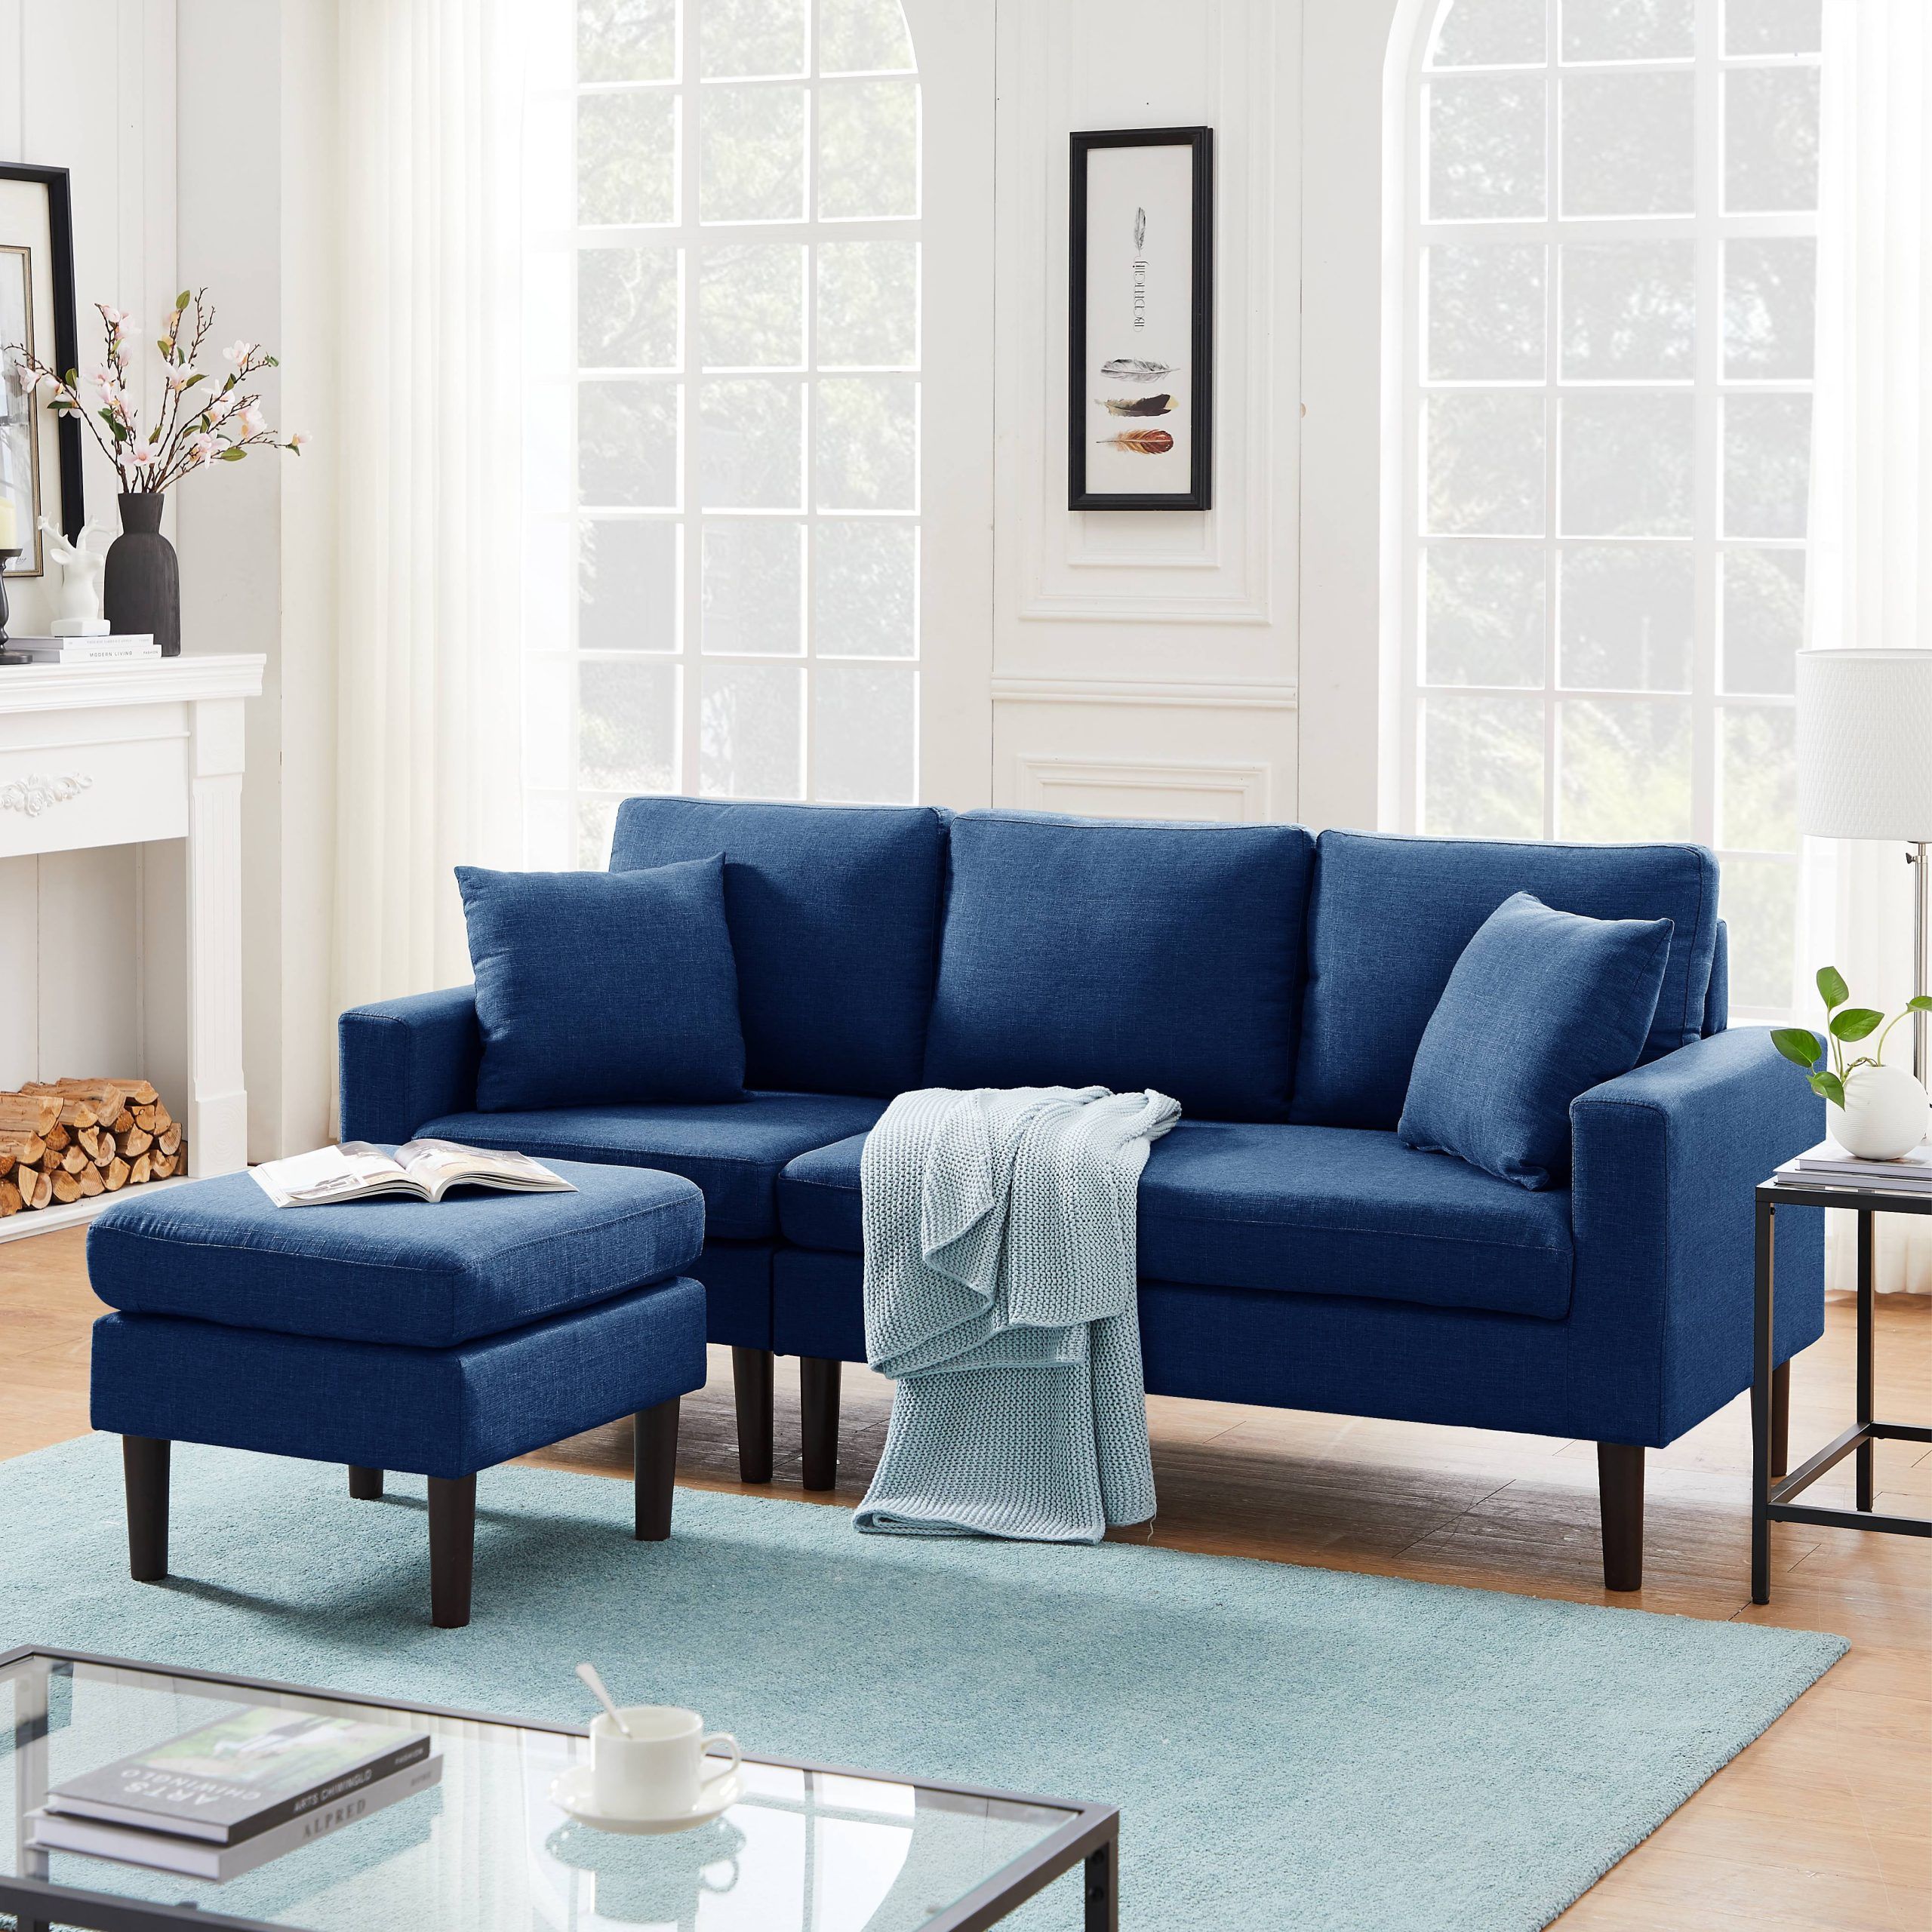 Uhomepro 77"w Mid Century Couches And Sofas Set With Ottoman, High End Throughout Modern Blue Linen Sofas (View 15 of 20)